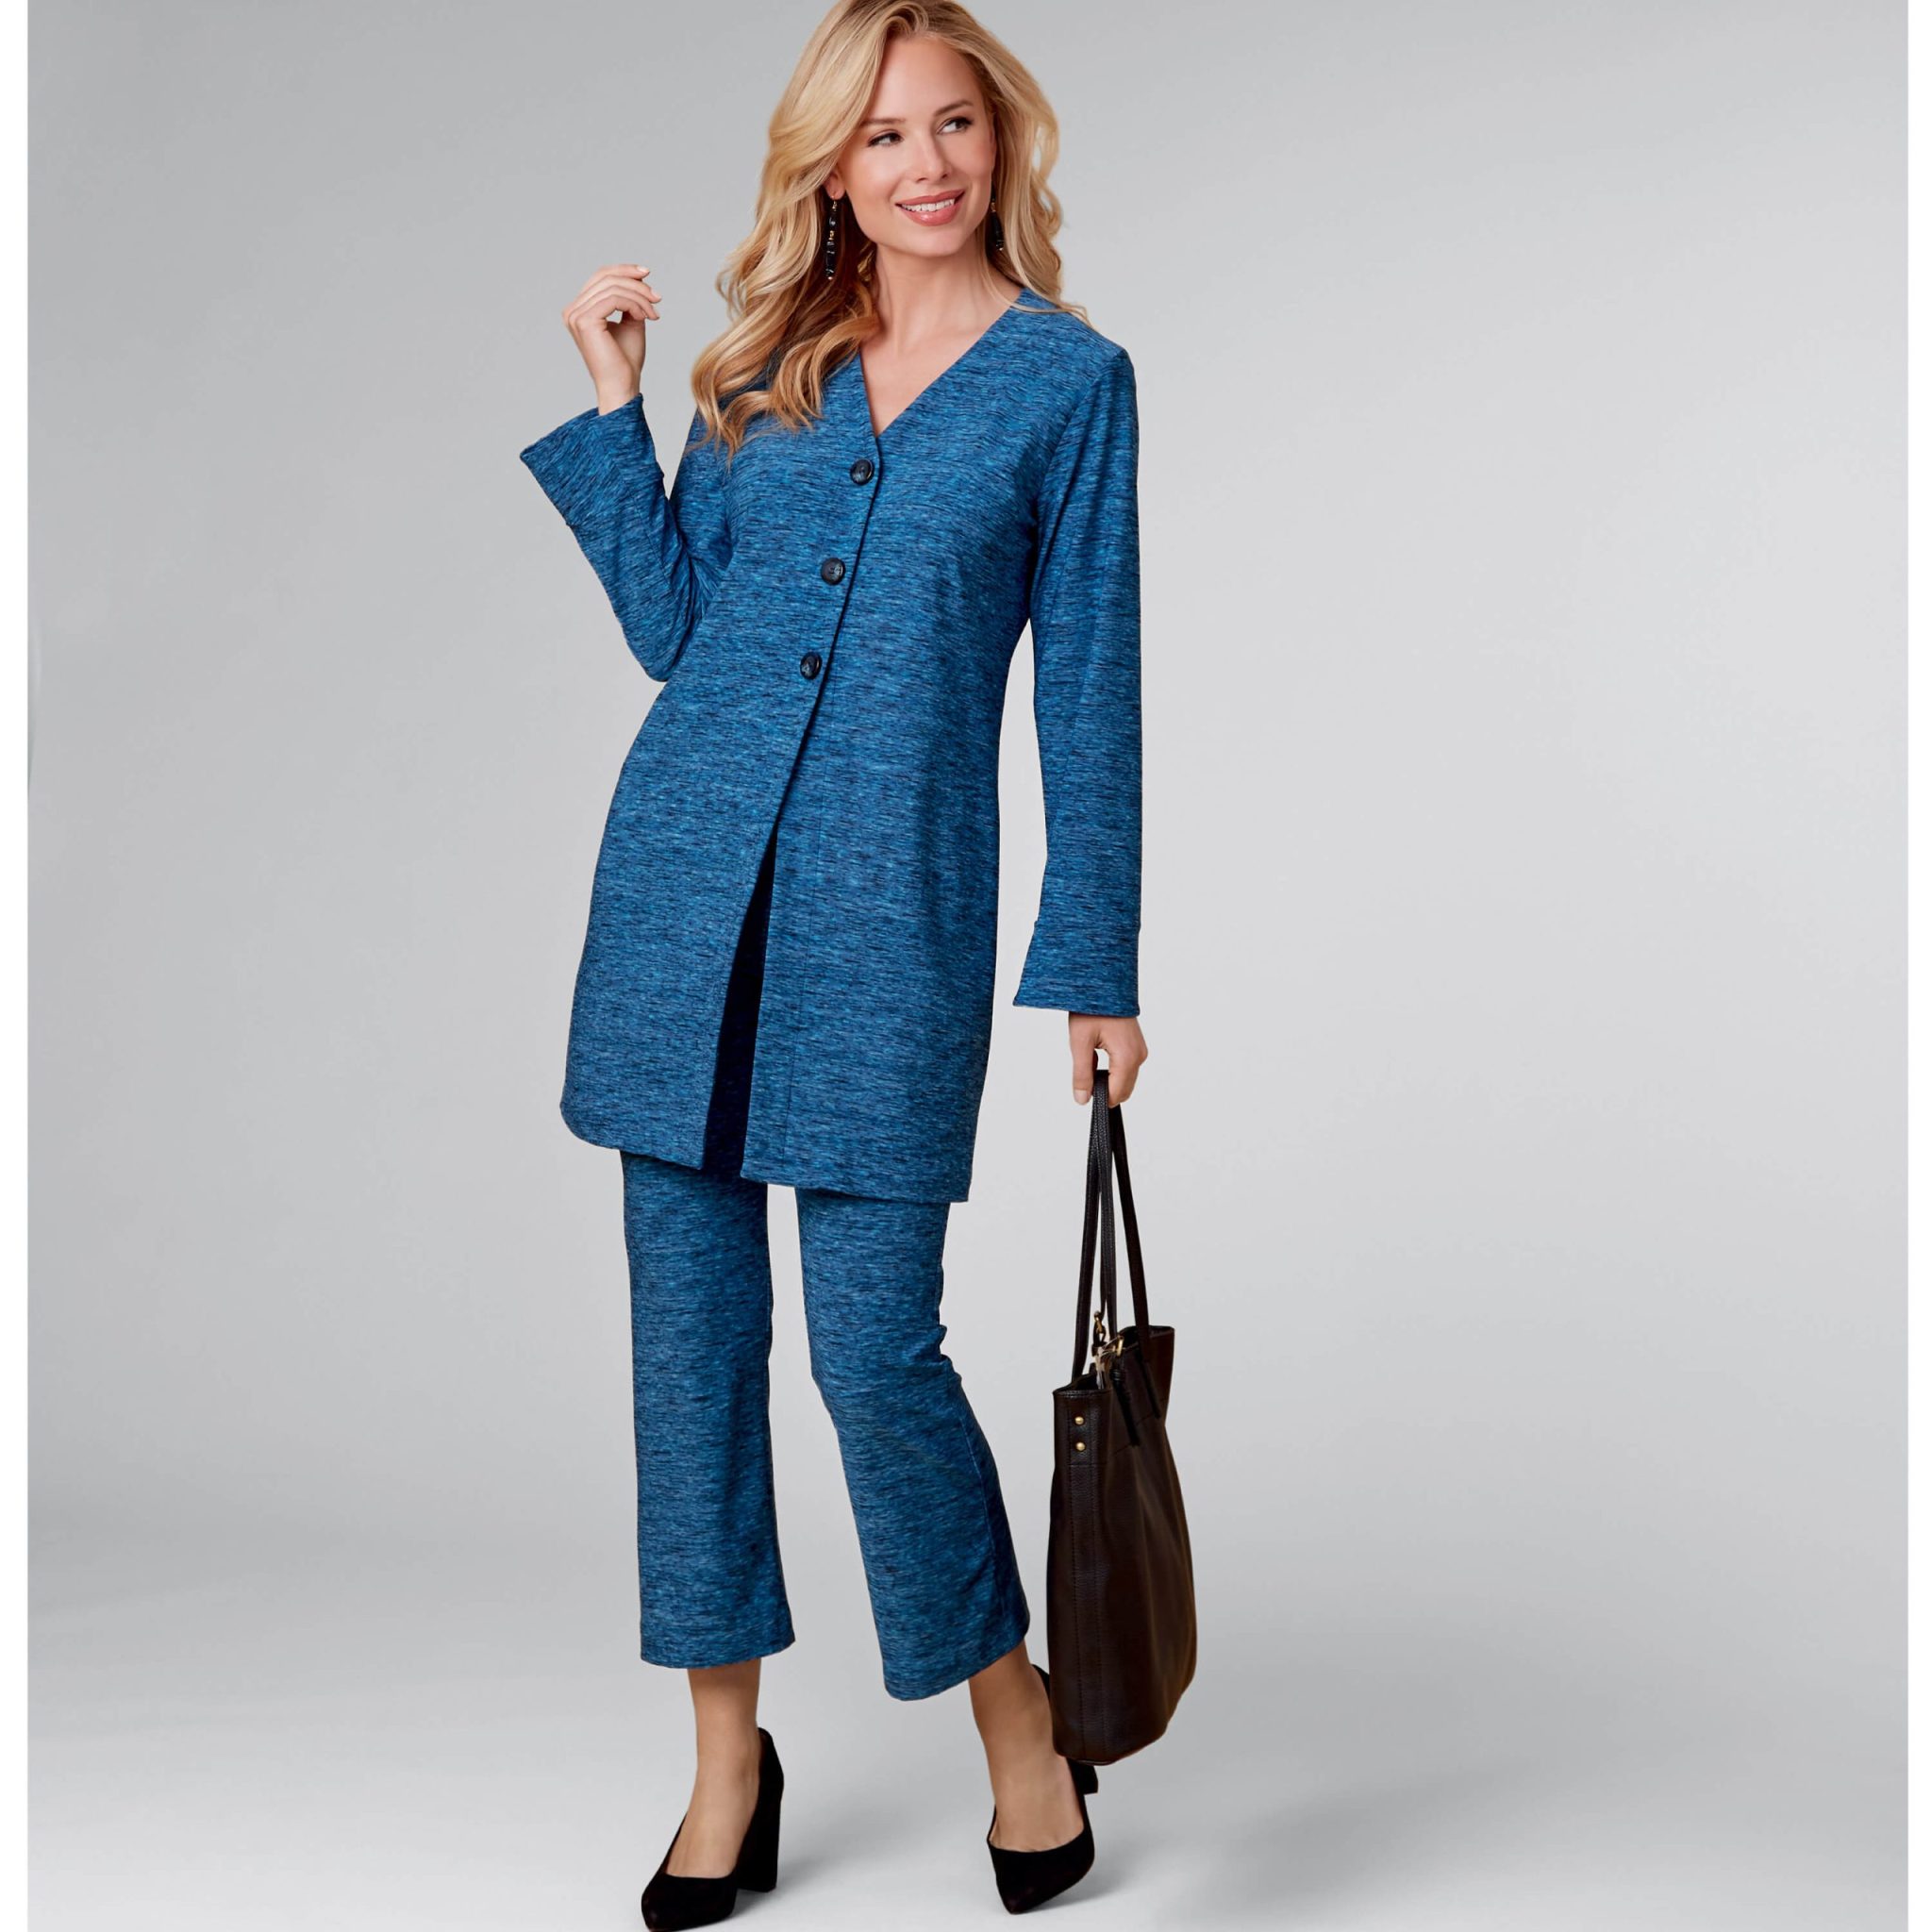 New Look Sewing Pattern N6711 Misses’ Cardigan Jacket and Trousers ...